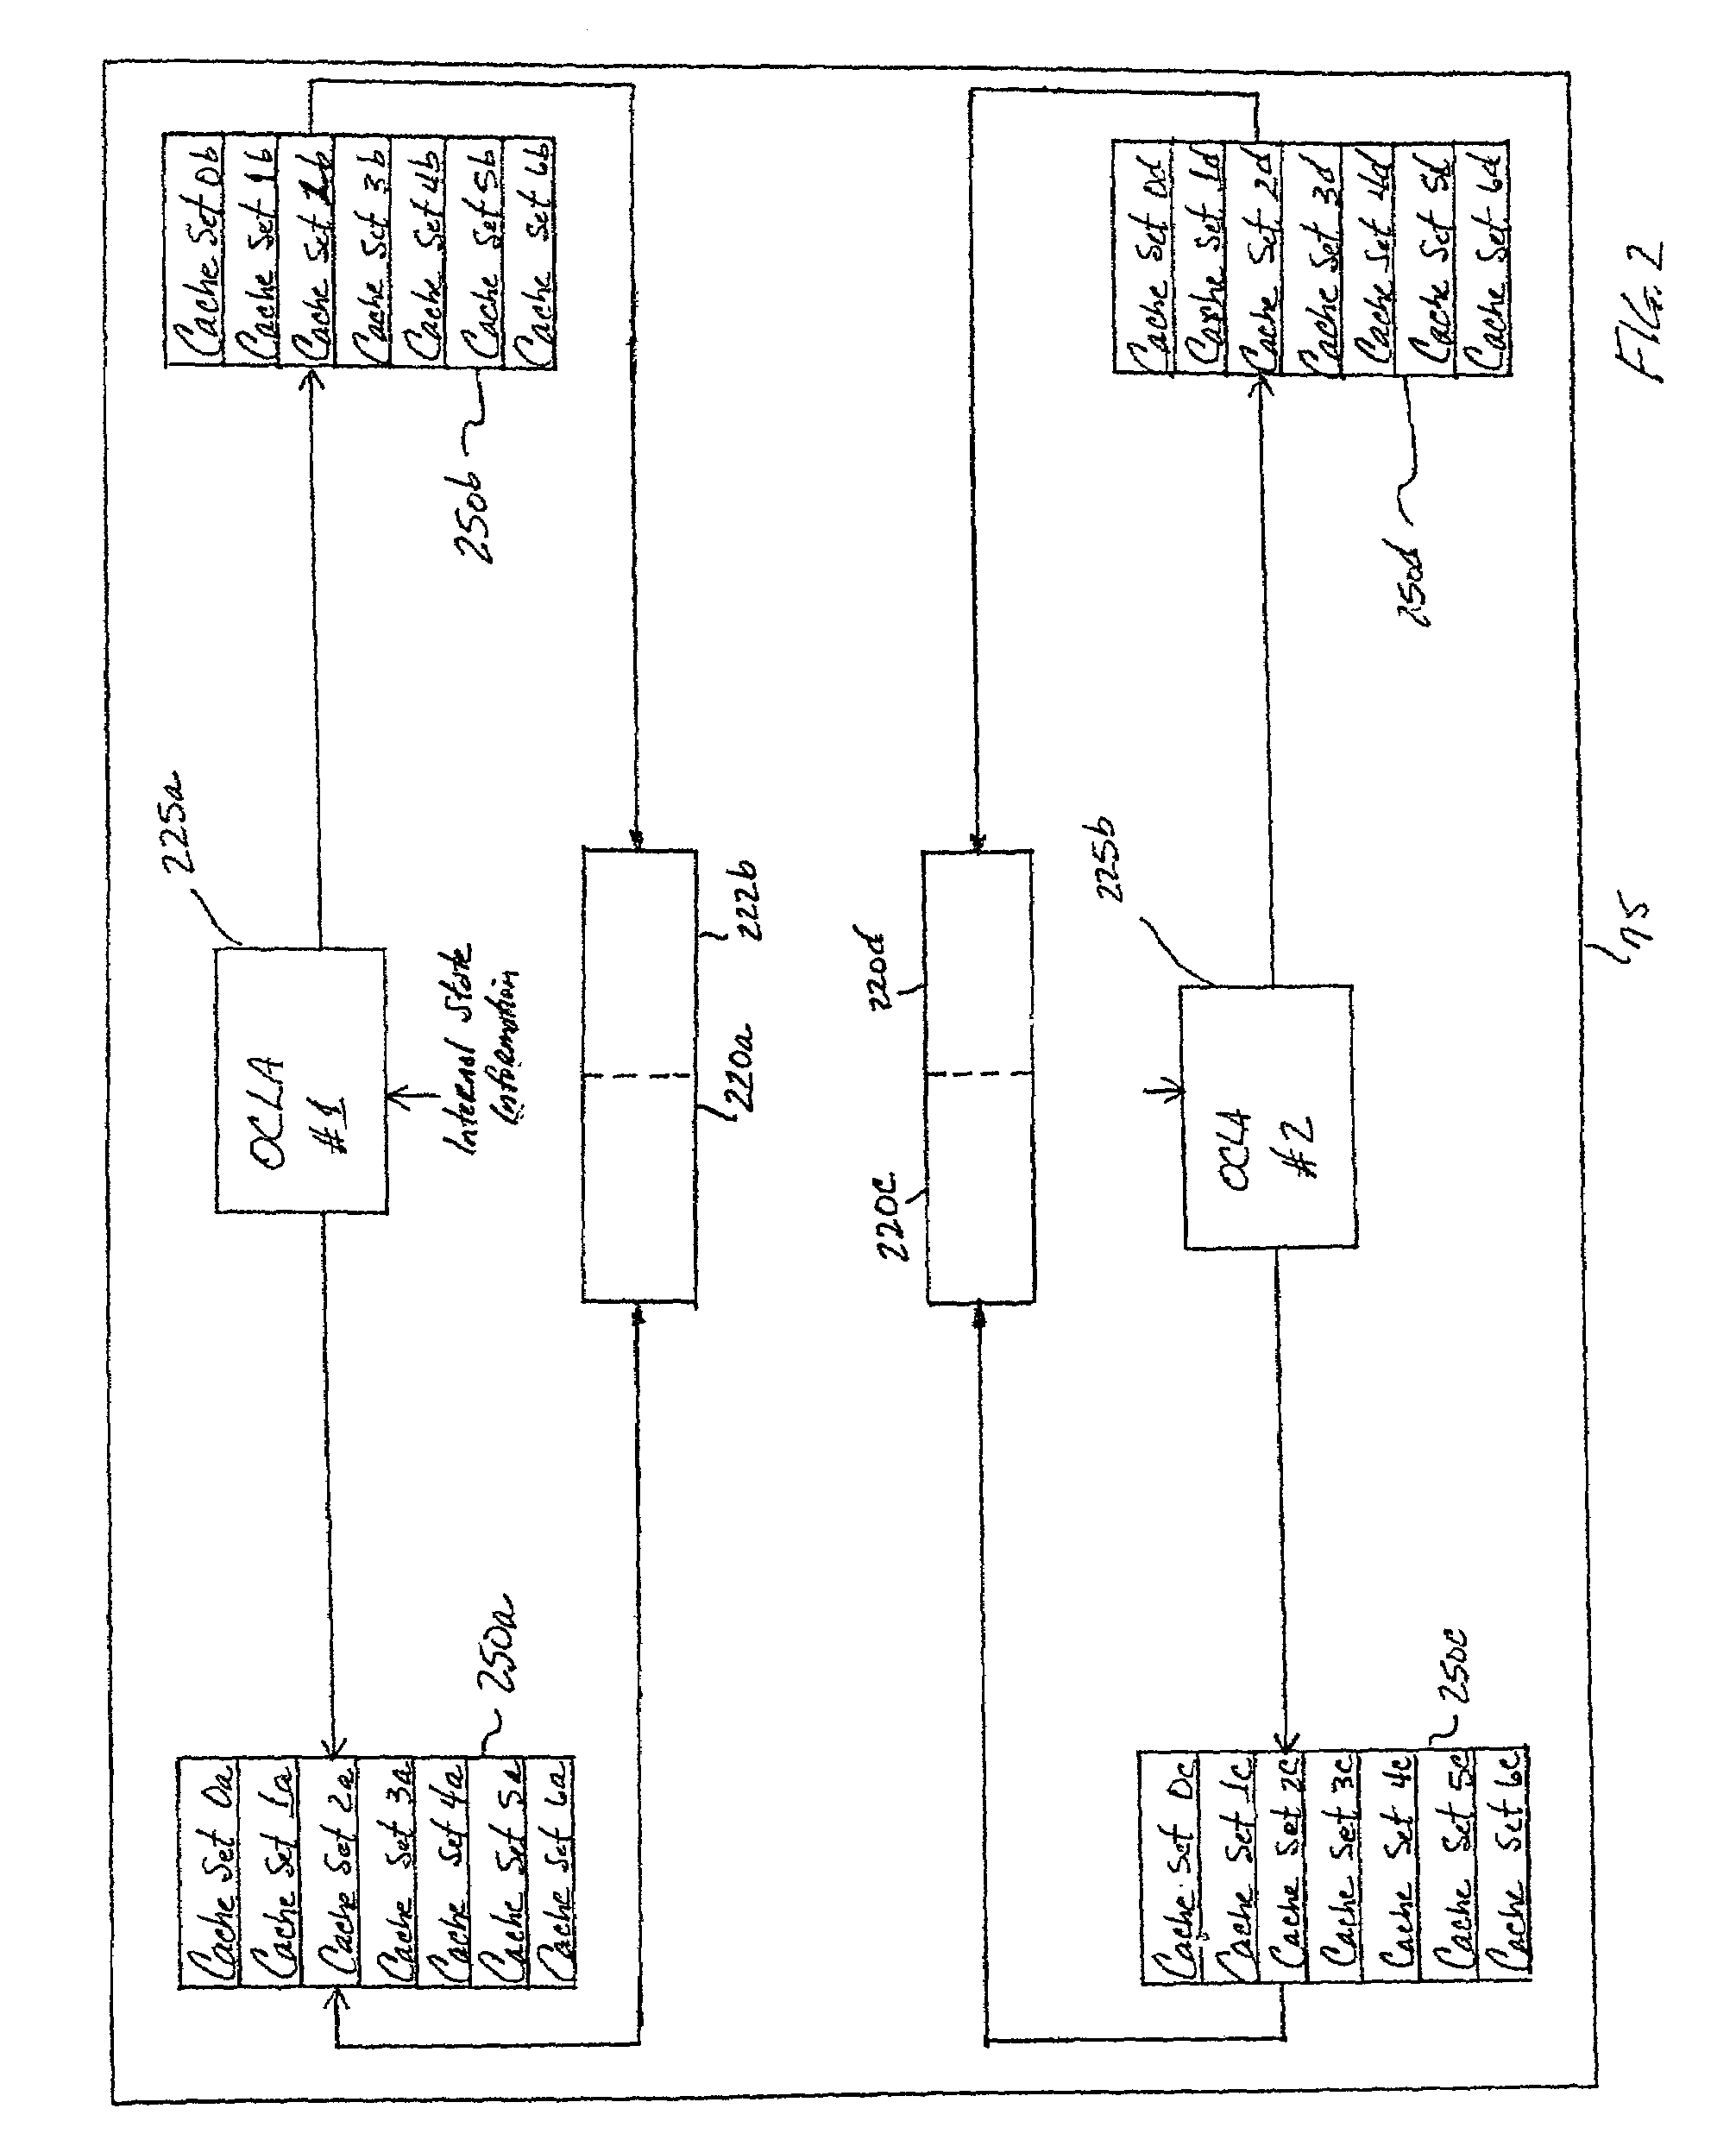 Method and apparatus for efficiently implementing trace and/or logic analysis mechanisms on a processor chip